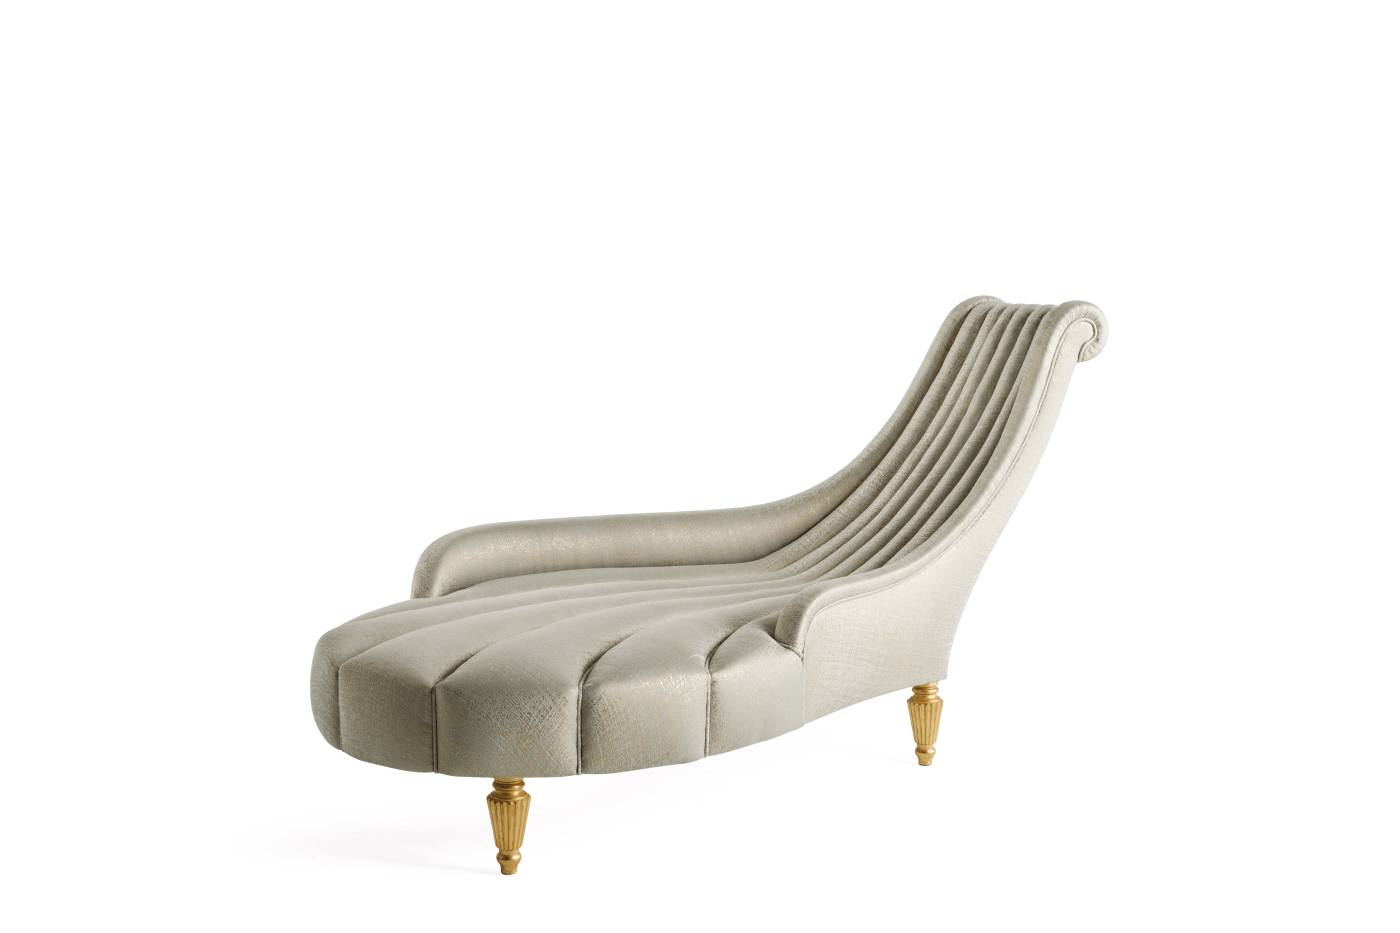 JUPITER dormeuse - Quality furniture and timeless elegance with luxury Made in Italy classic chaise longues and dormeuses.